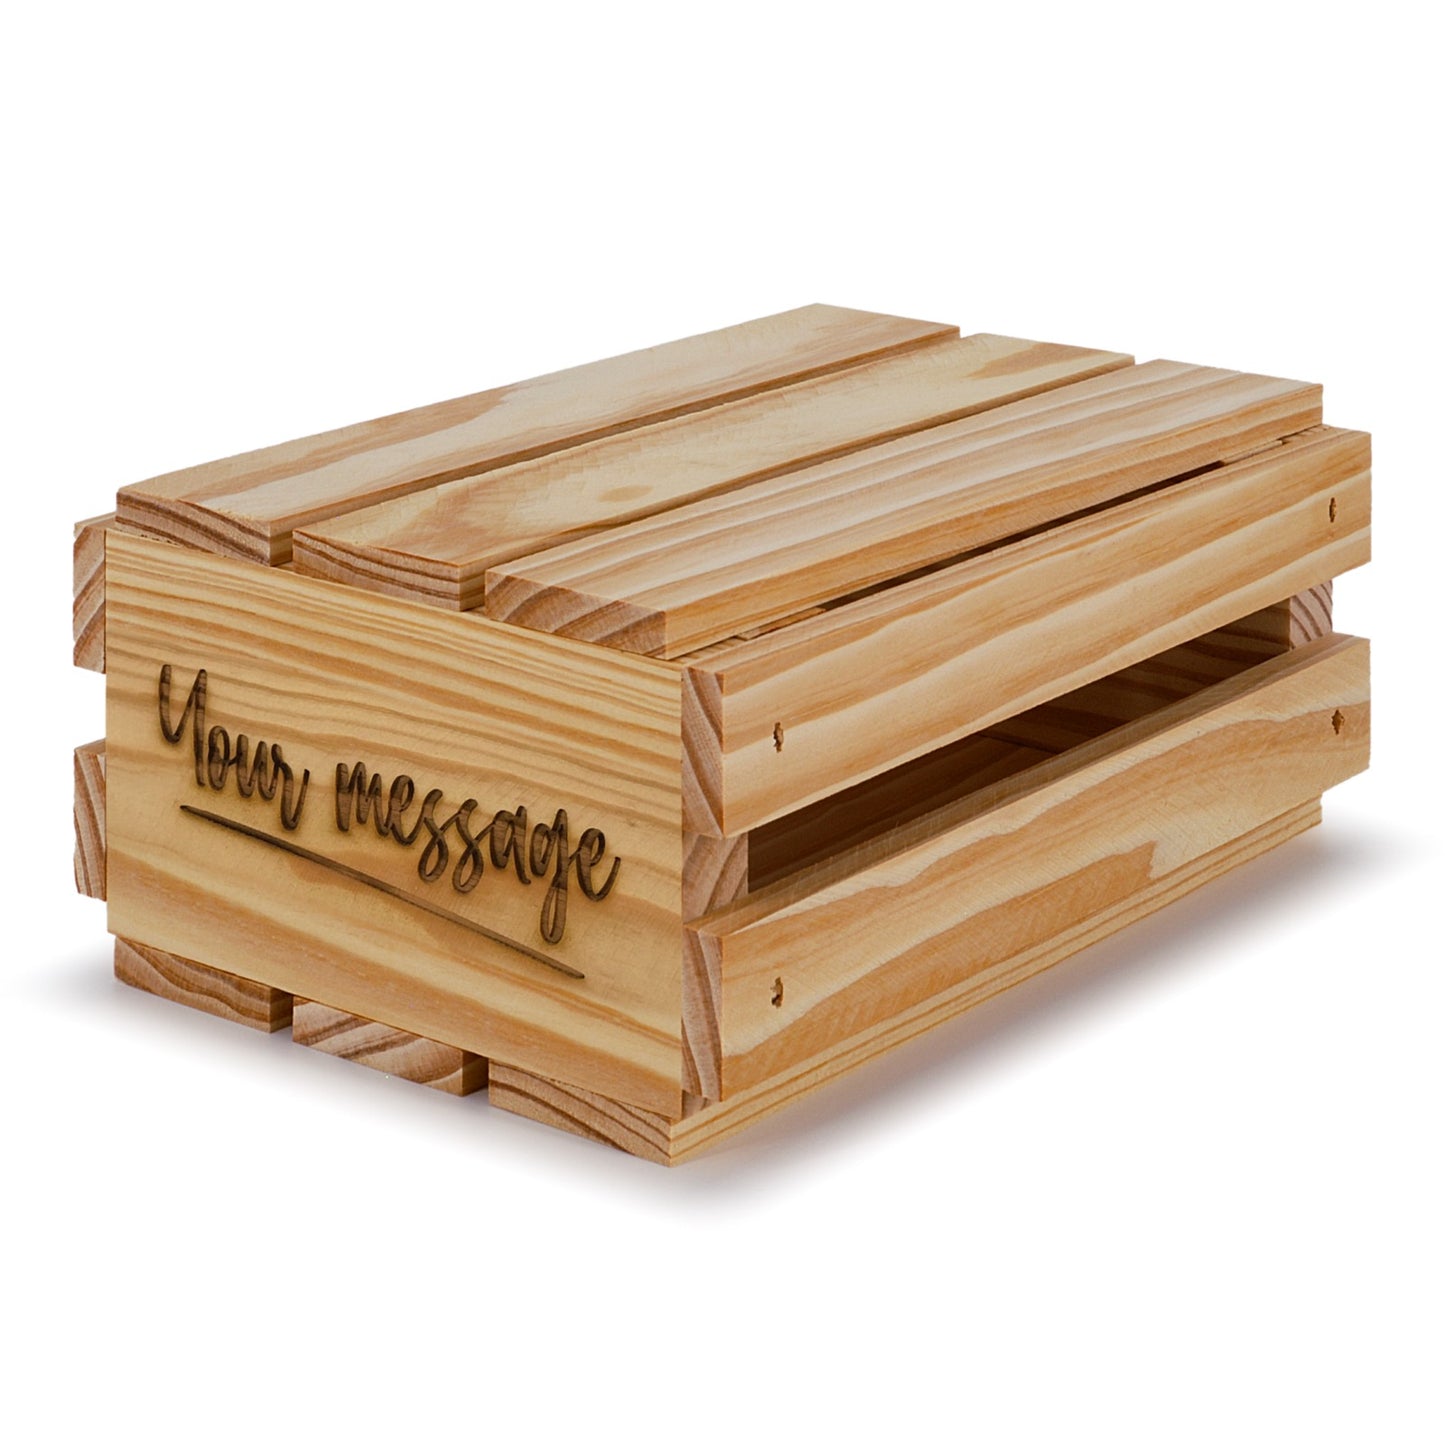 Small wooden crates with lid and your custom message 8x6x3.5, 6-SS-8-6-3.5-ST-NW-LL, 12-SS-8-6-3.5-ST-NW-LL, 24-SS-8-6-3.5-ST-NW-LL, 48-SS-8-6-3.5-ST-NW-LL, 96-SS-8-6-3.5-ST-NW-LL